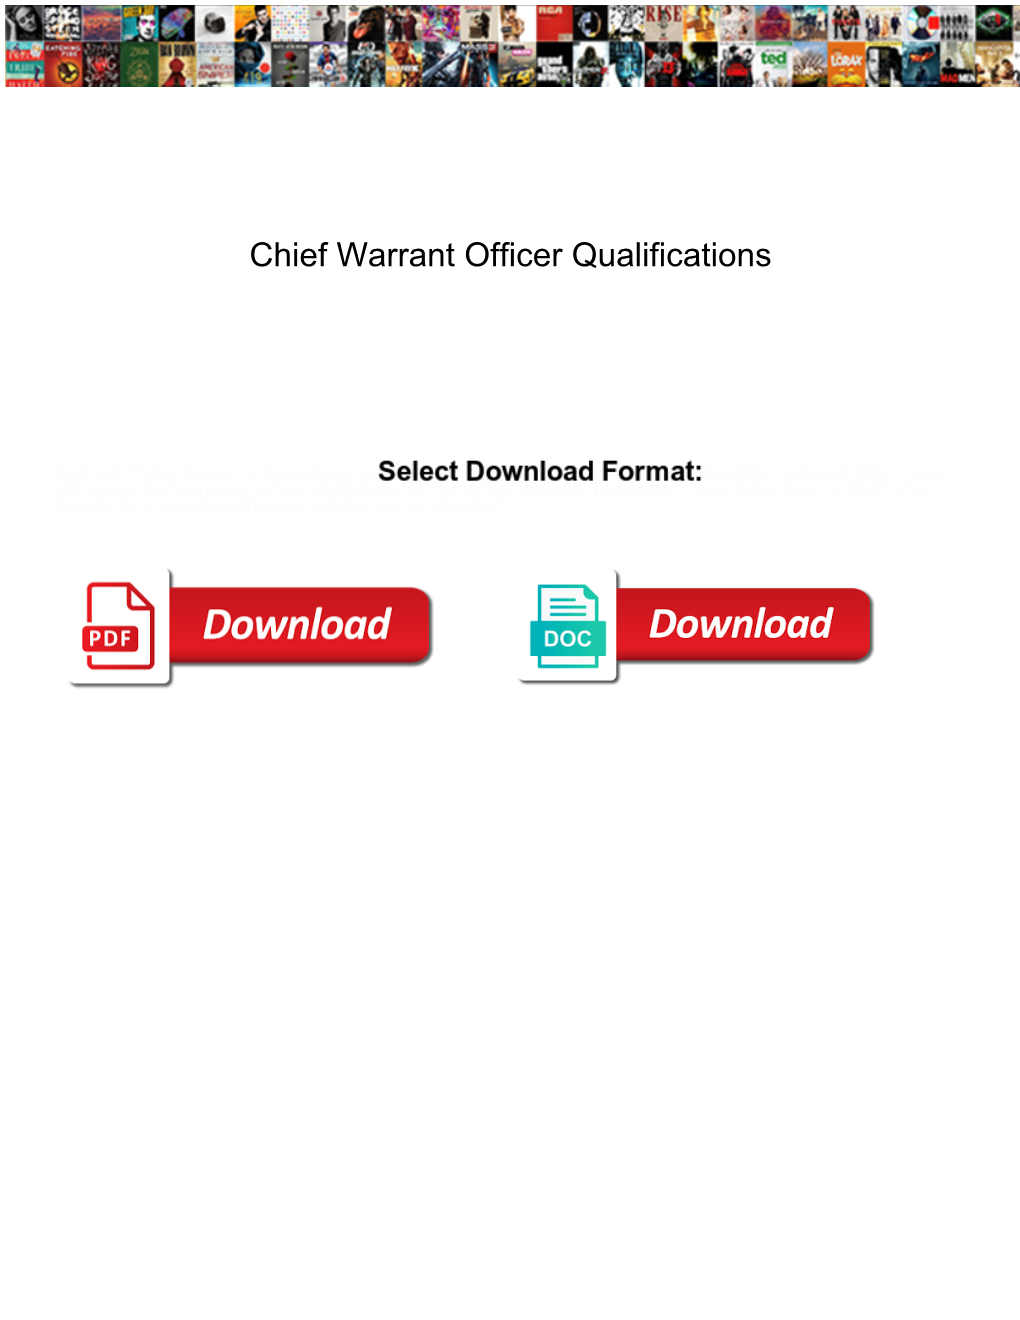 Chief Warrant Officer Qualifications